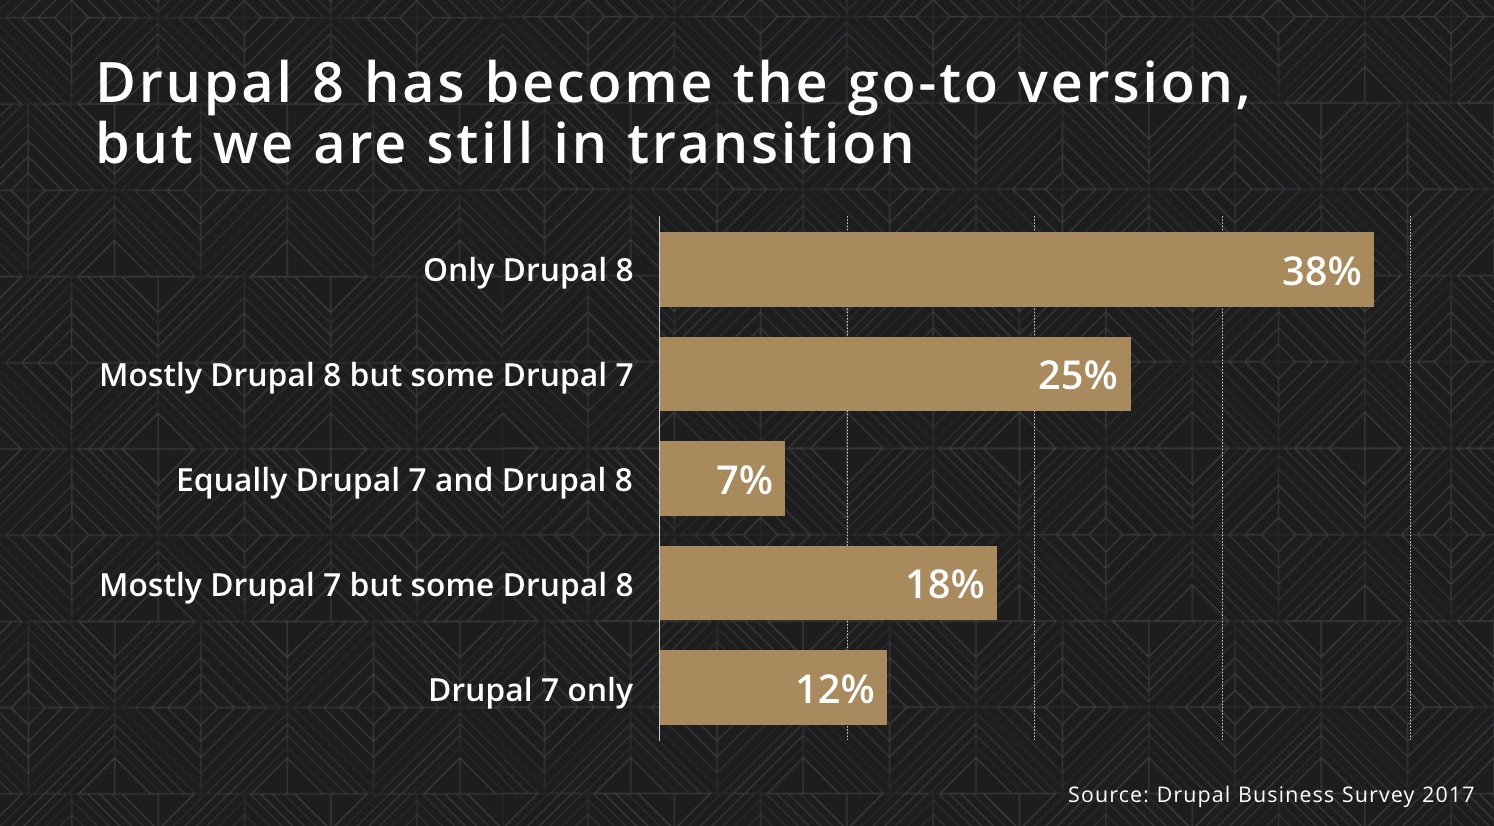 Drupal agencies report that most Drupal projects are using Drupal 8 now